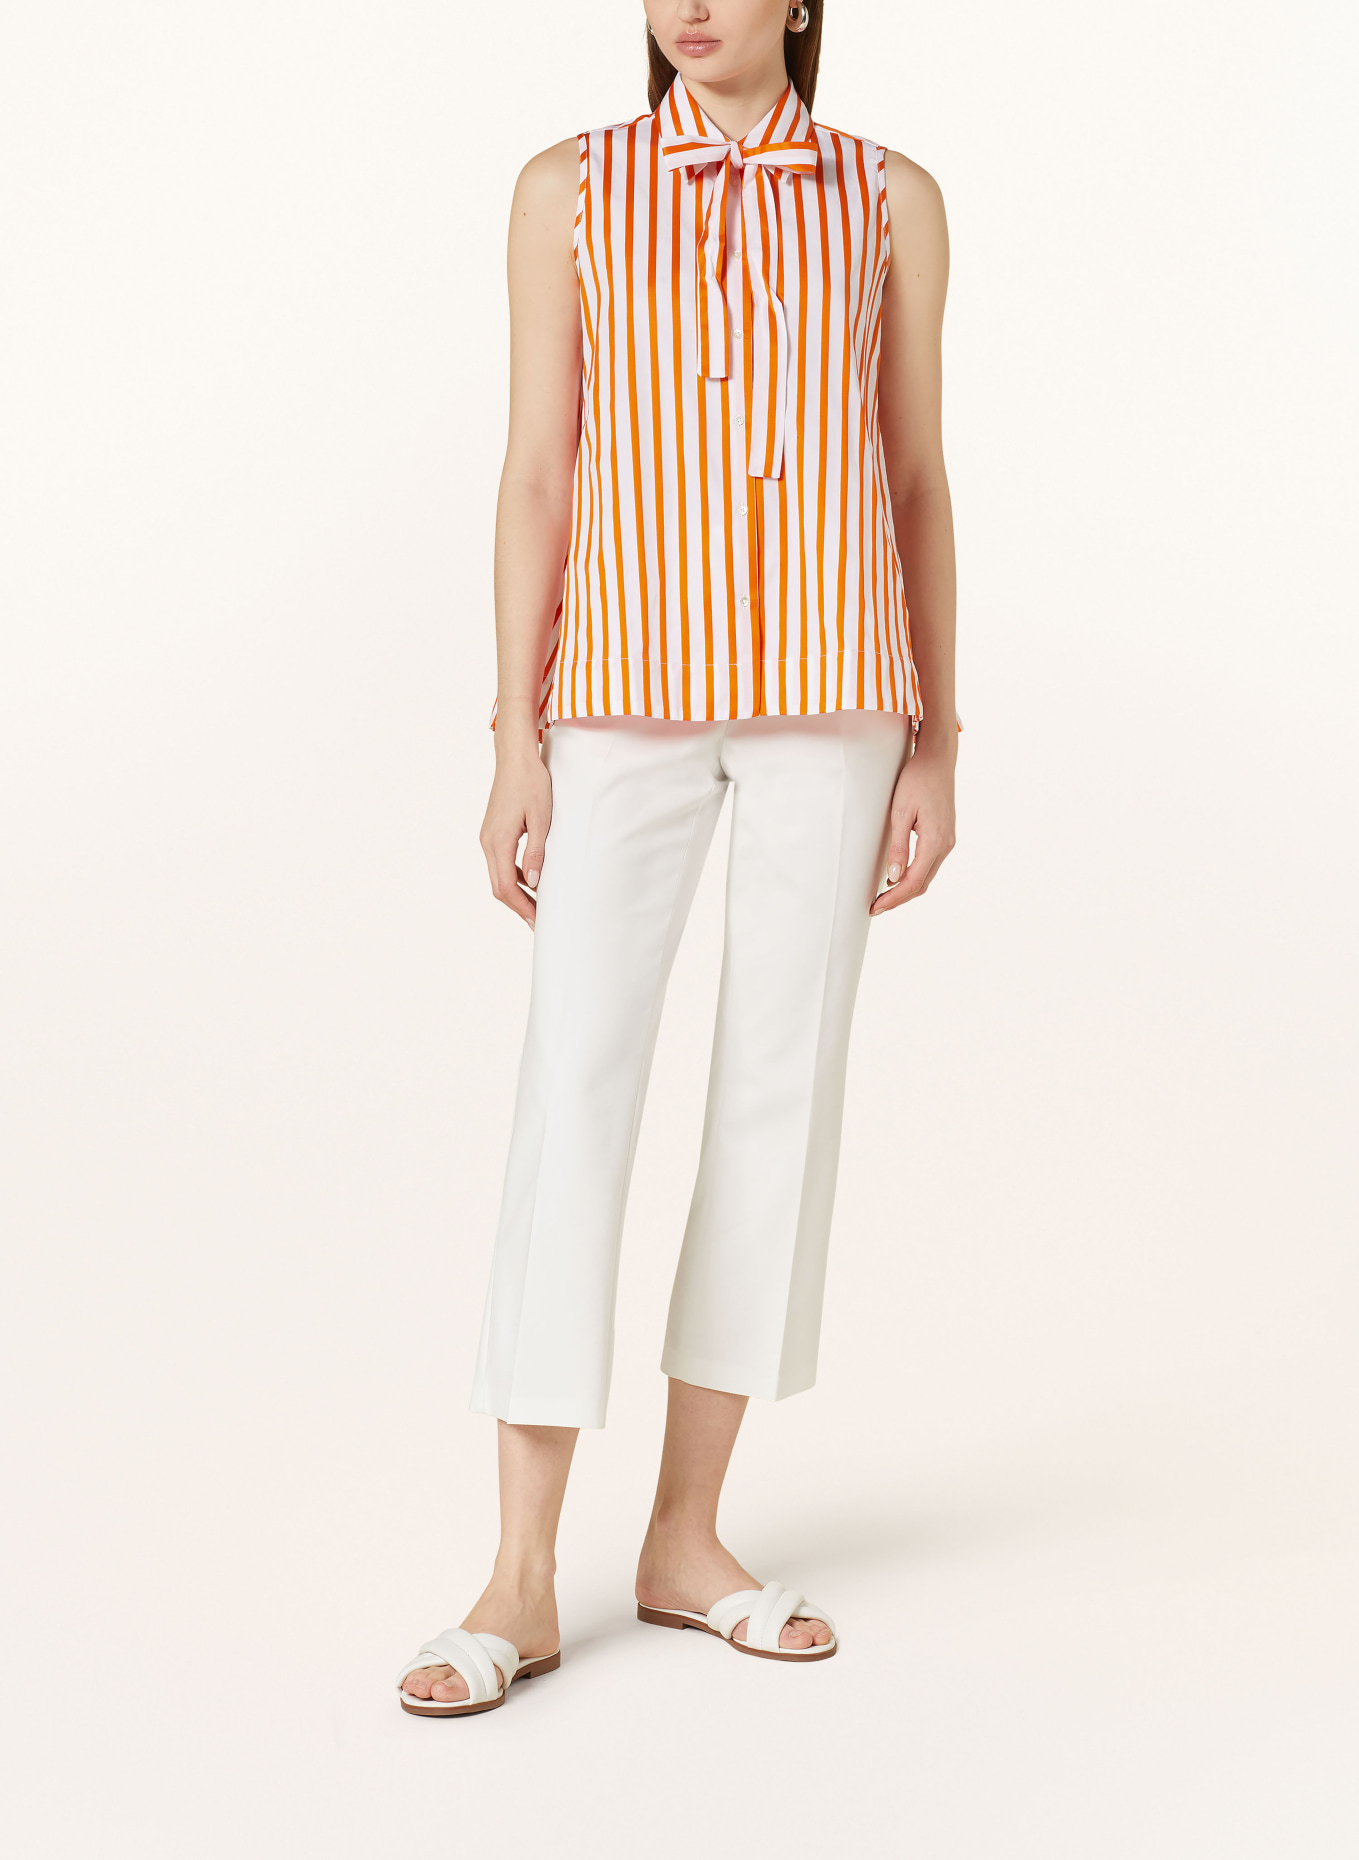 TONNO & PANNA Blouse top with bow, Color: WHITE/ ORANGE (Image 2)